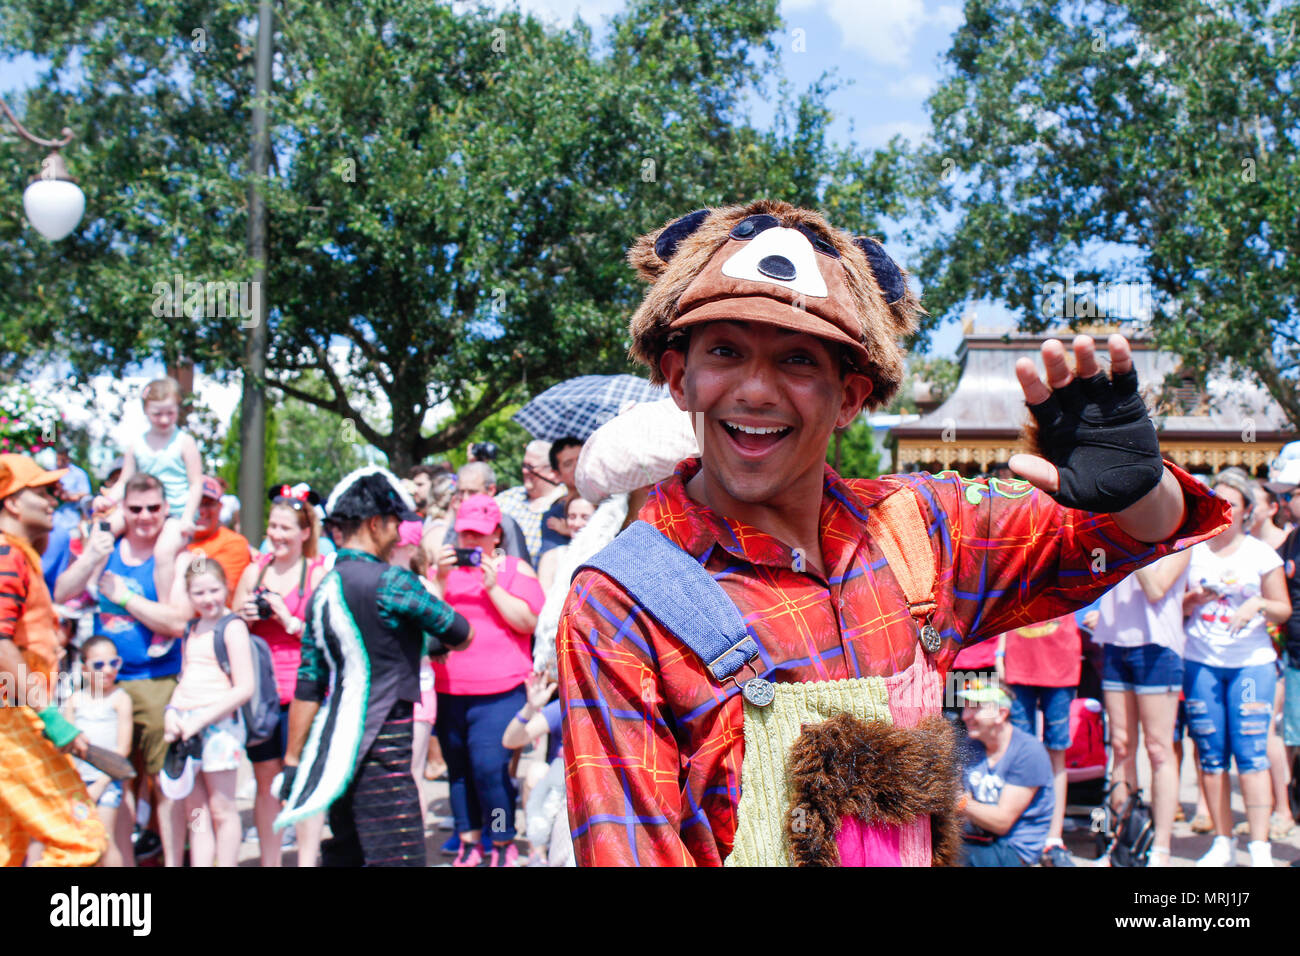 A portrait of a cheerful funny cute man in a fancy costume of raccoon. Photo taken on a Disney parade in Disneyworld. Stock Photo